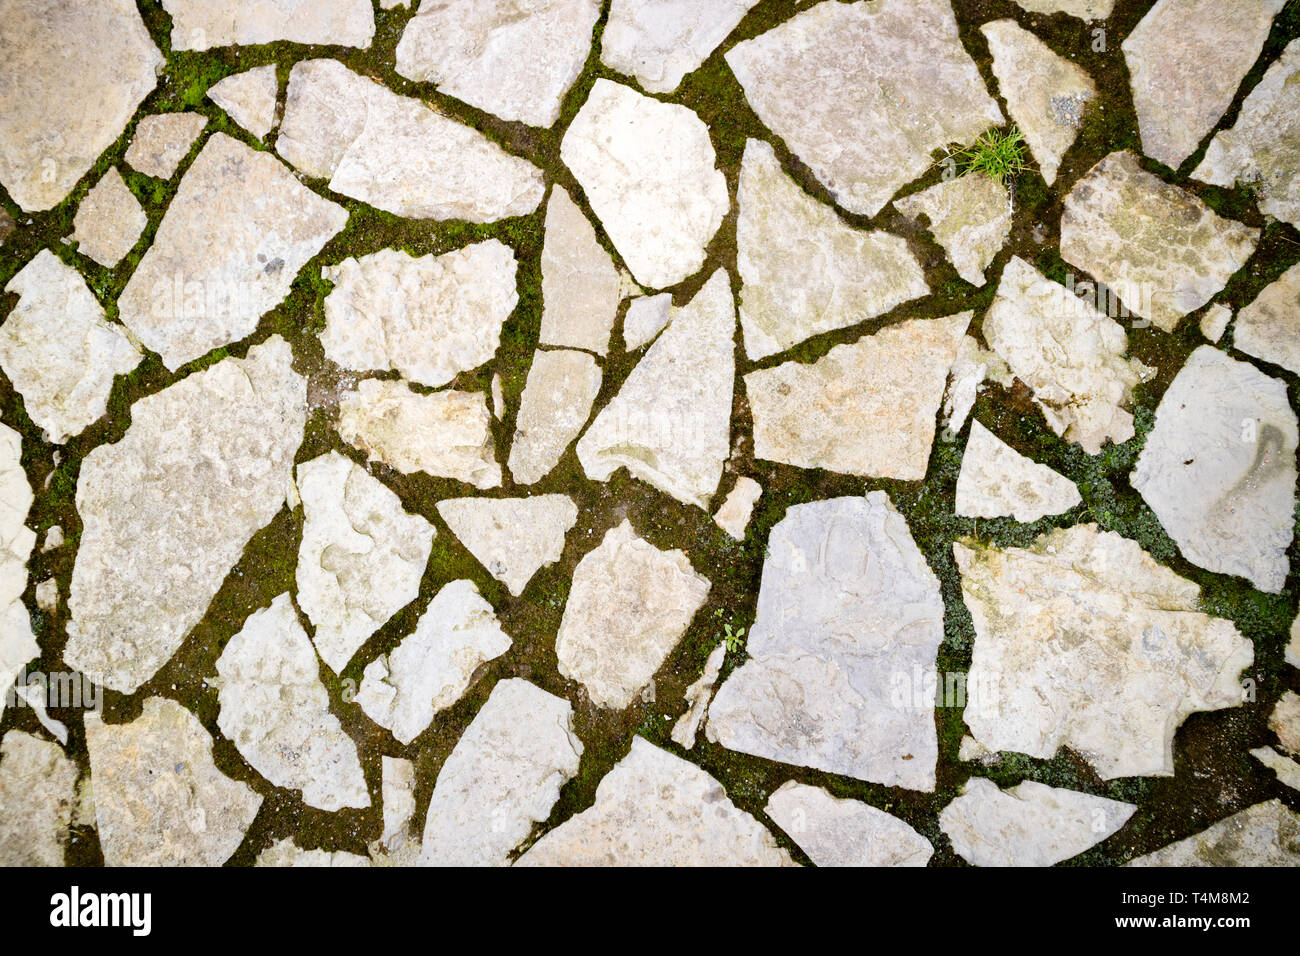 Texture of old stone pavement. Granite cobblestoned pavement. Background of stone paving floor street. Top view Stock Photo